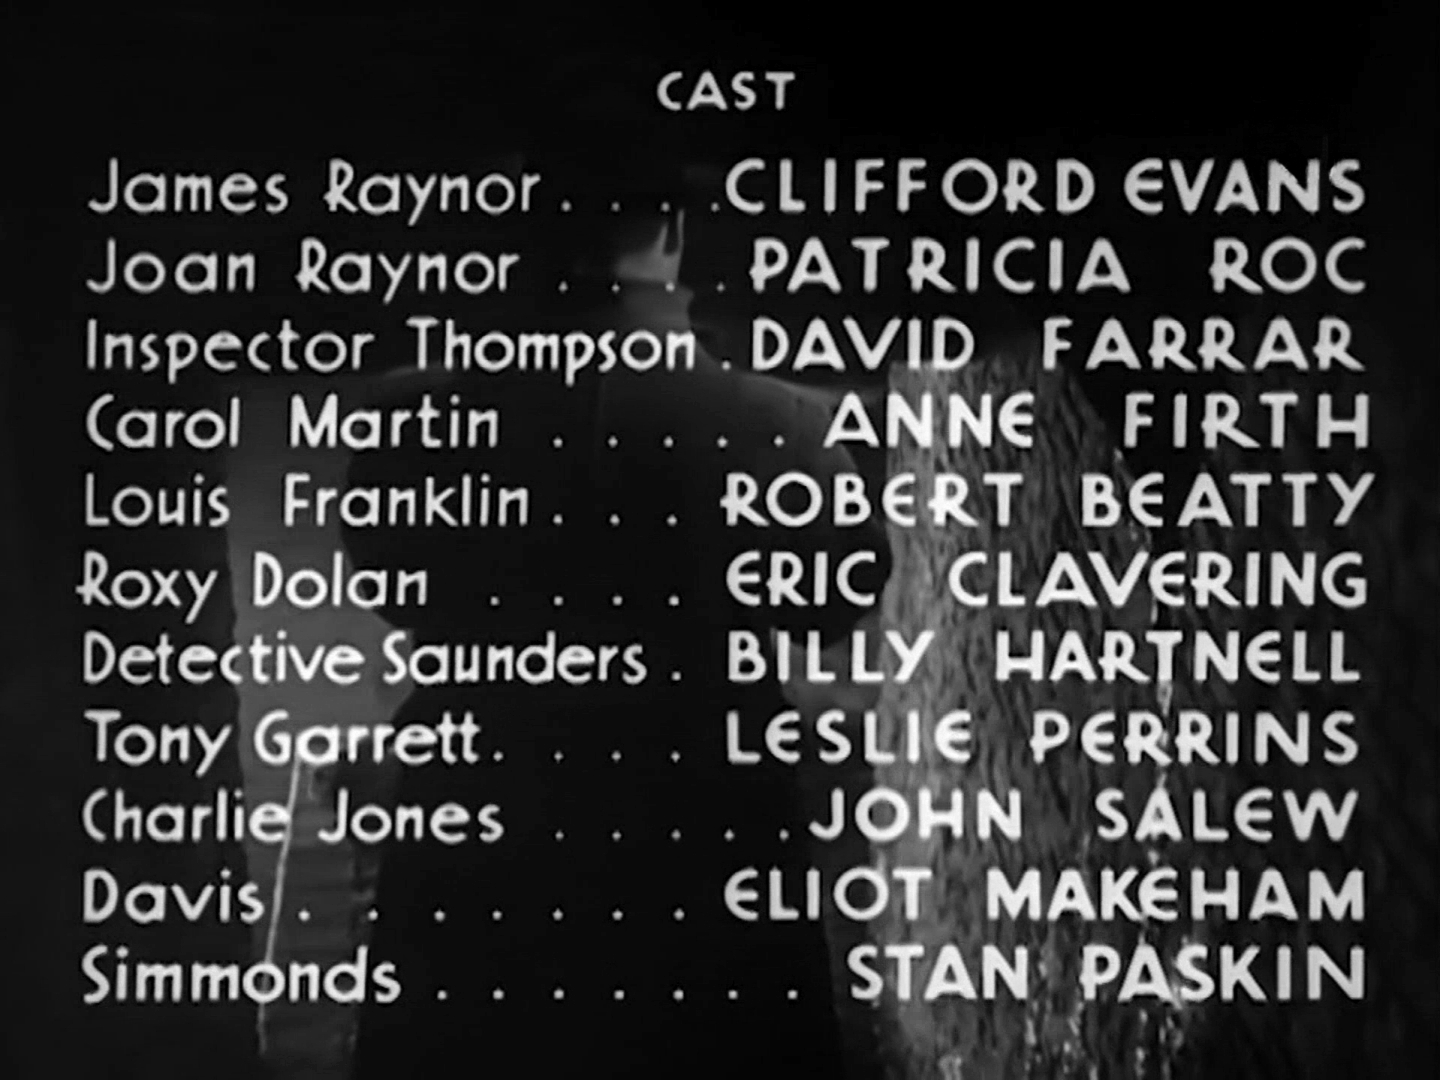 Main title from Suspected Person (1942) (6). Clifford Evans, Patricia Roc, David Farrar, Anne Firth, Robert Beatty, Eric Clavering, Billy Hartnell